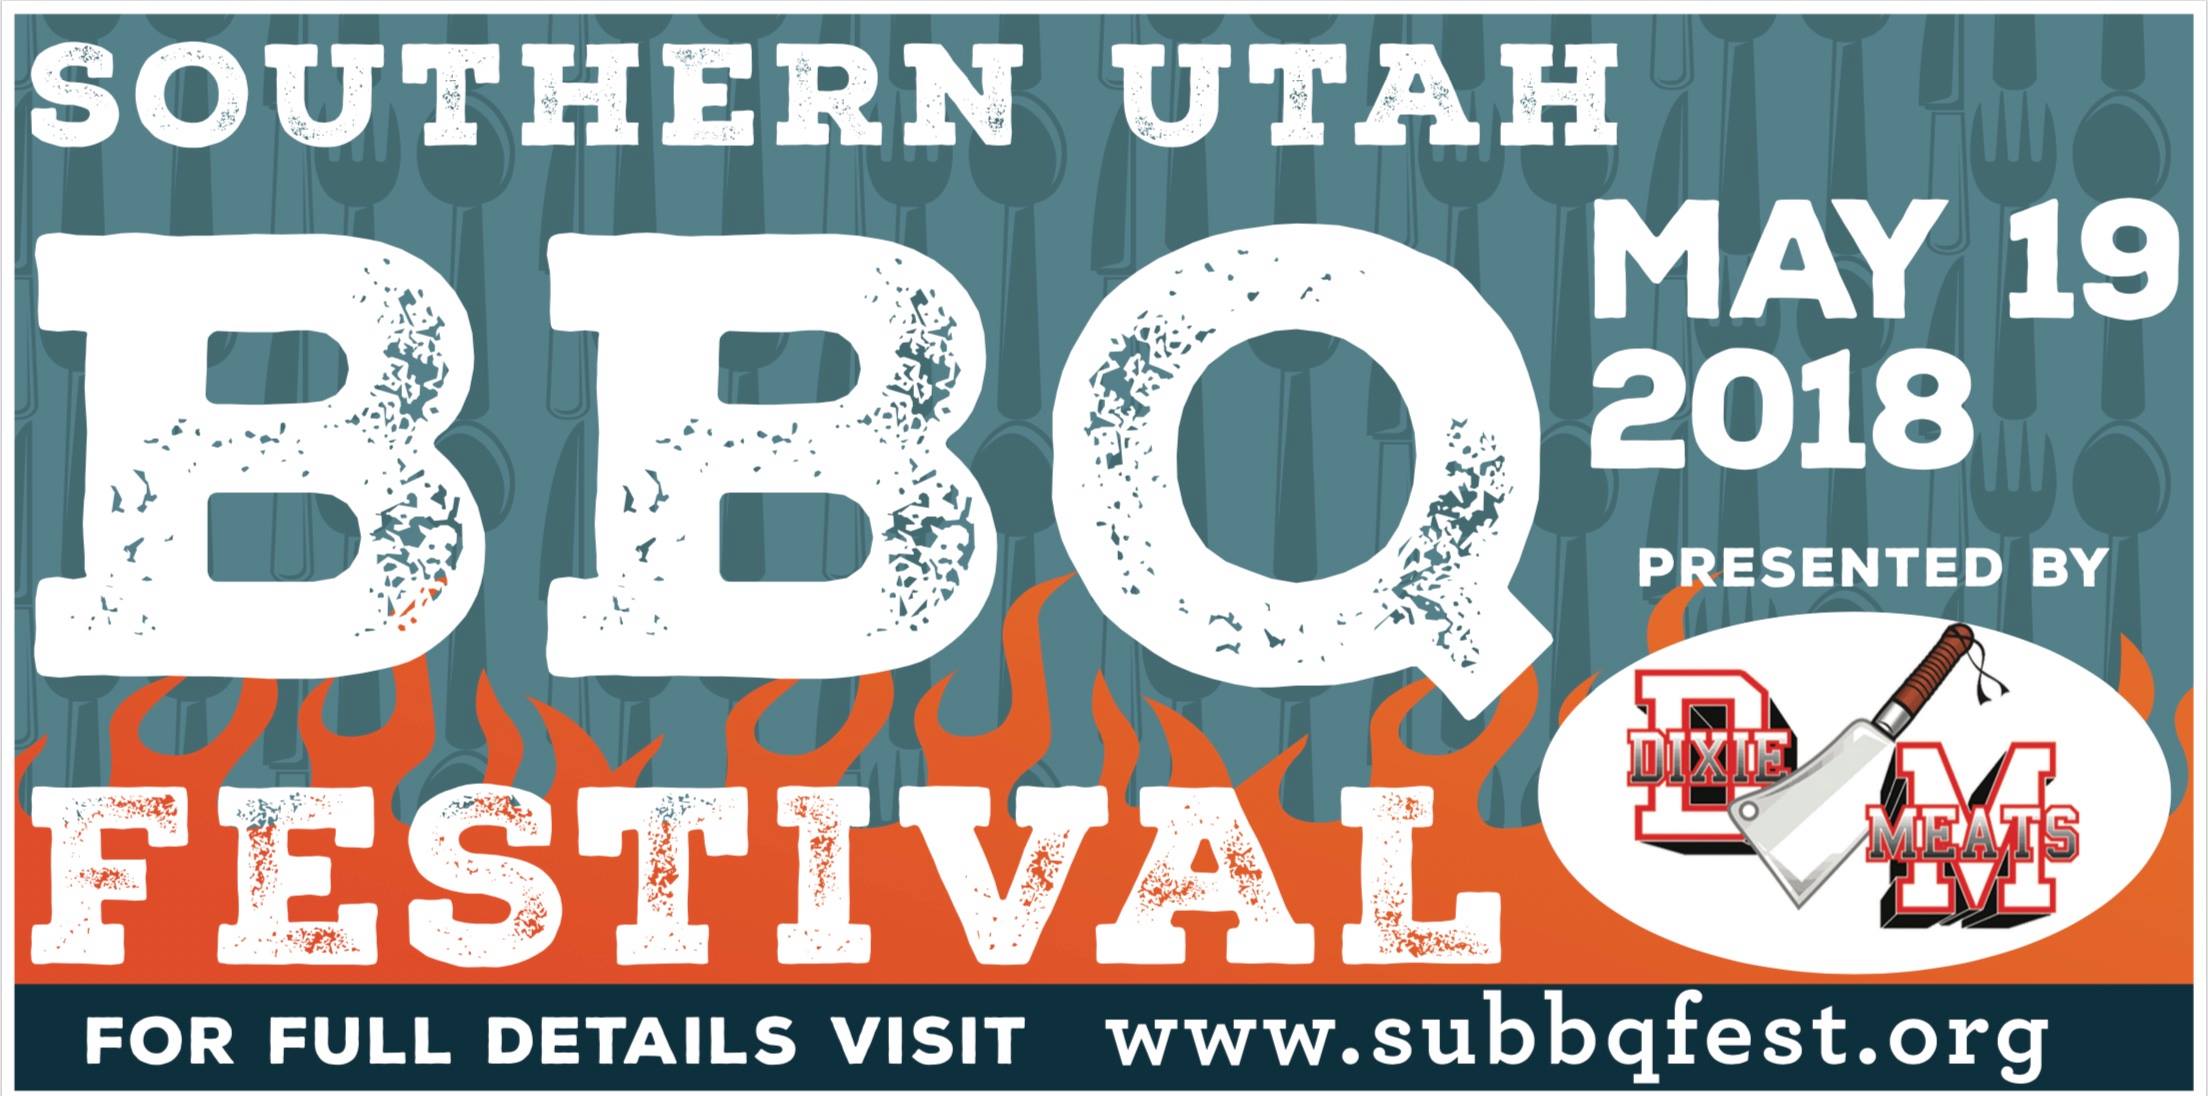 Grill masters set to bring the heat to ‘Southern Utah BBQ Festival